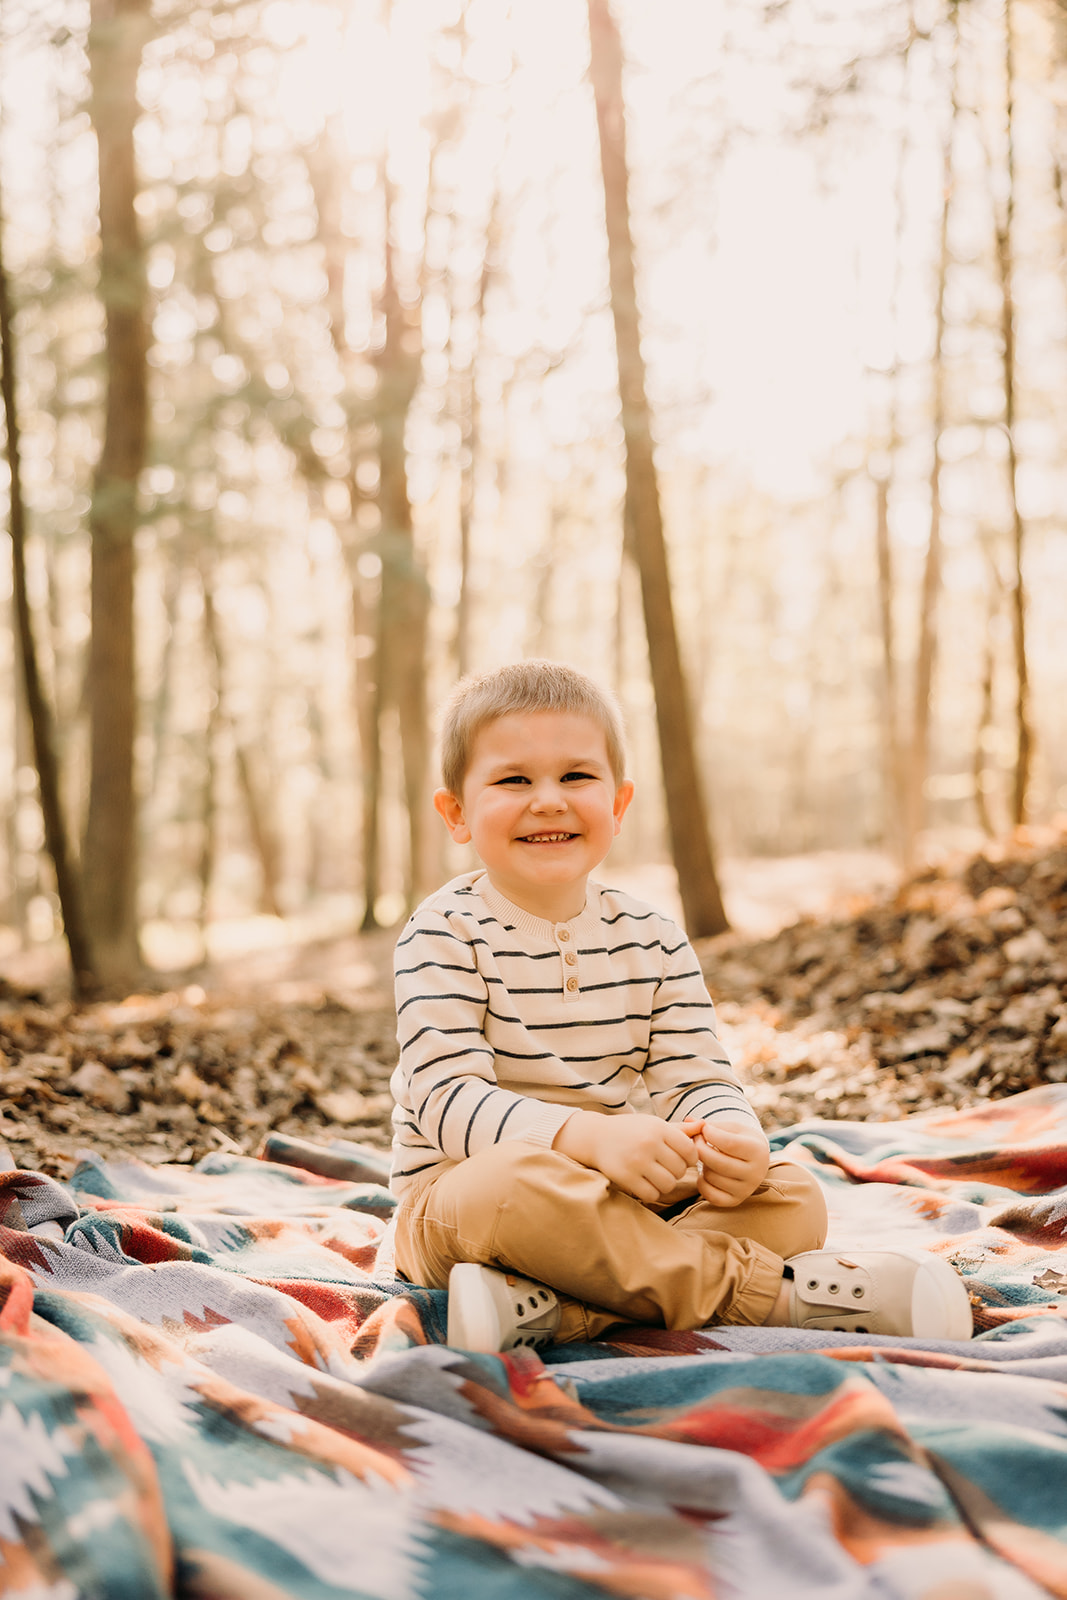 Cheerful child creating lasting memories in an outdoor photoshoot